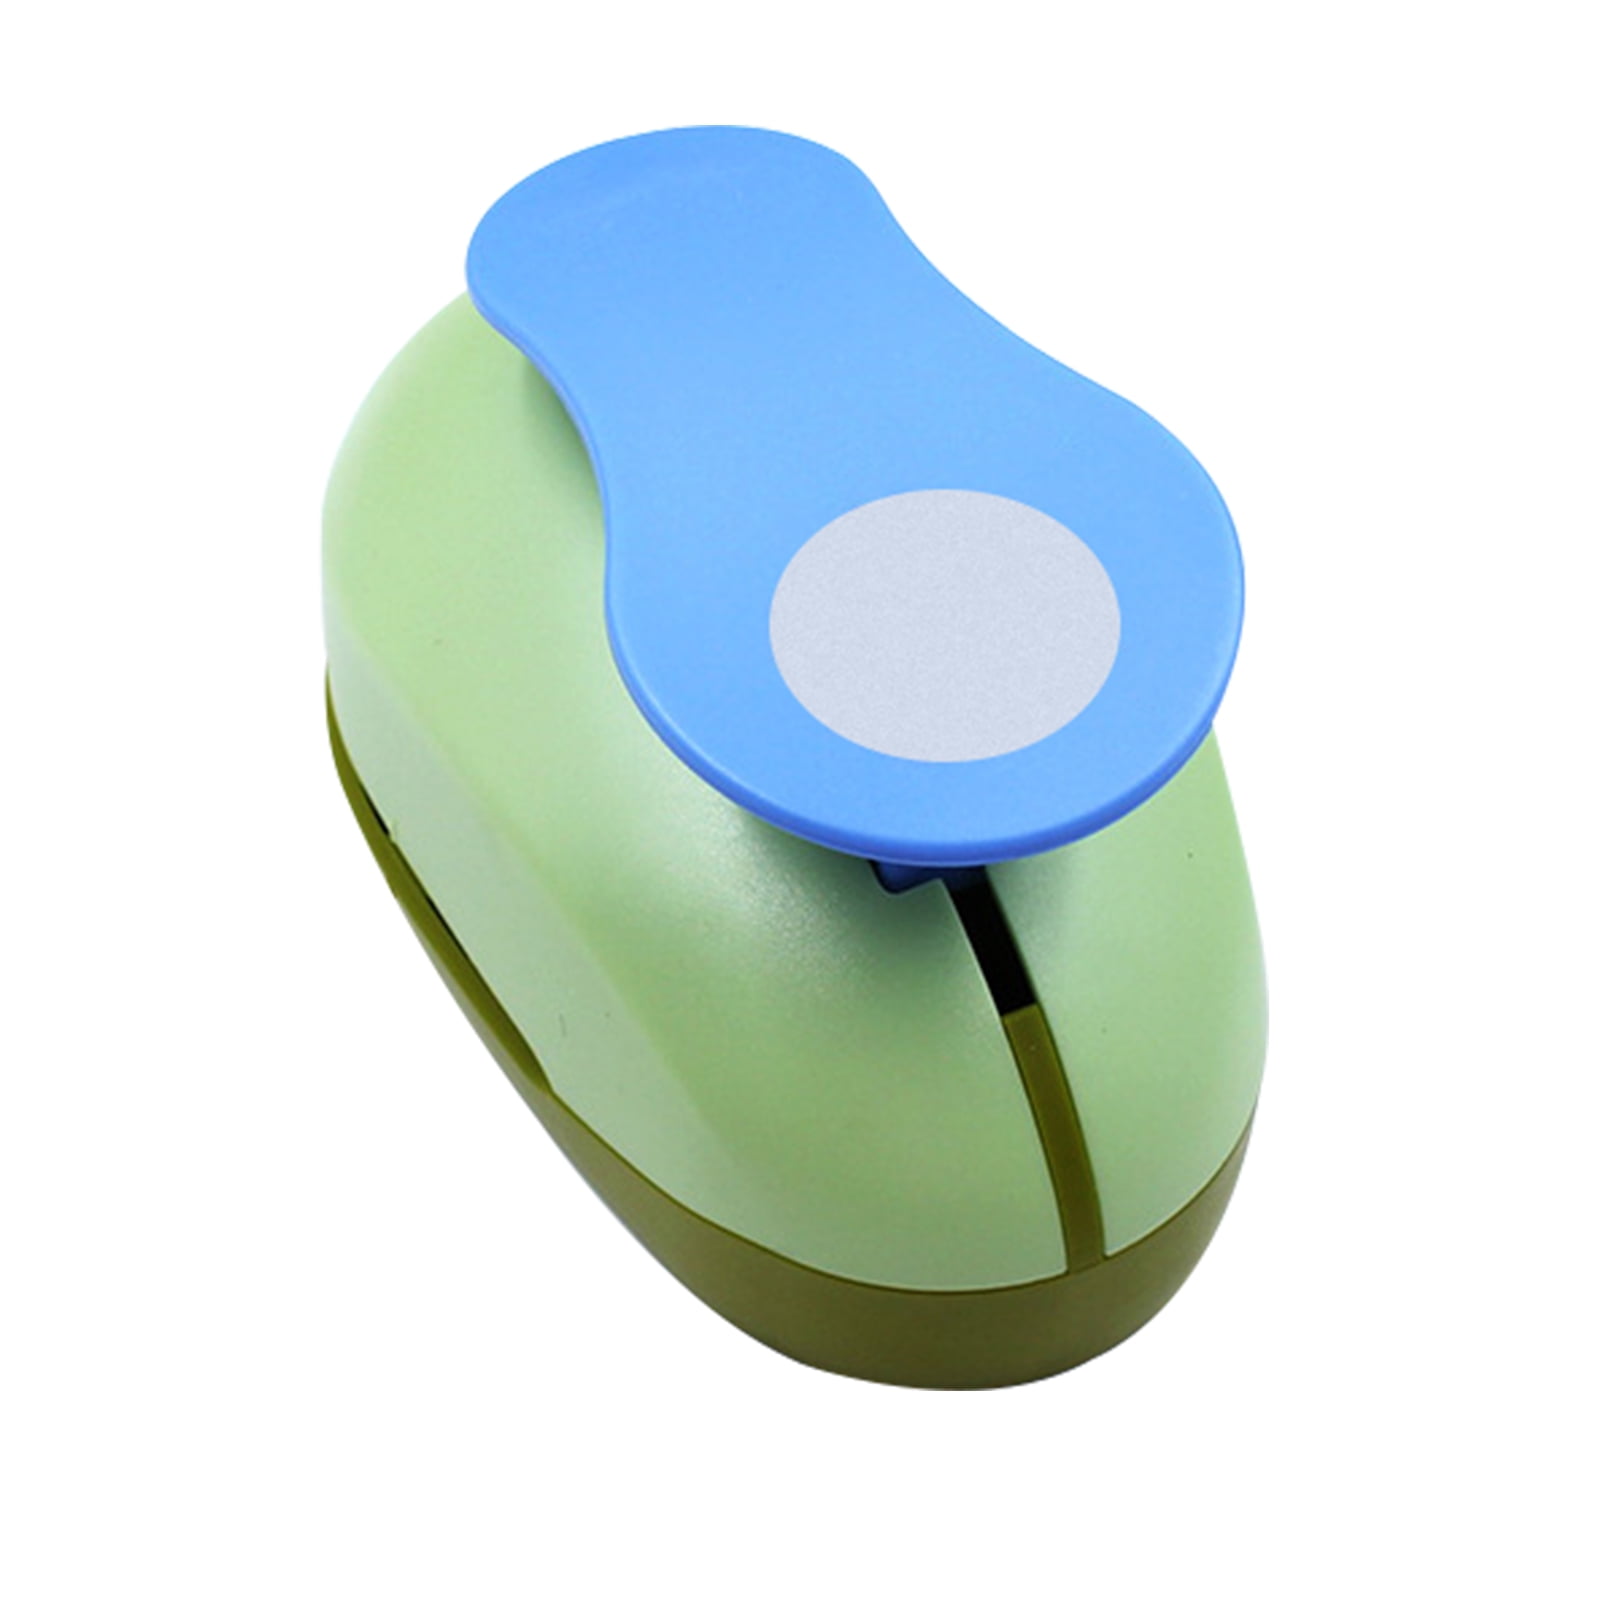 Circle Paper Punch,0.35 Circle Punches for Paper Crafts,9mm